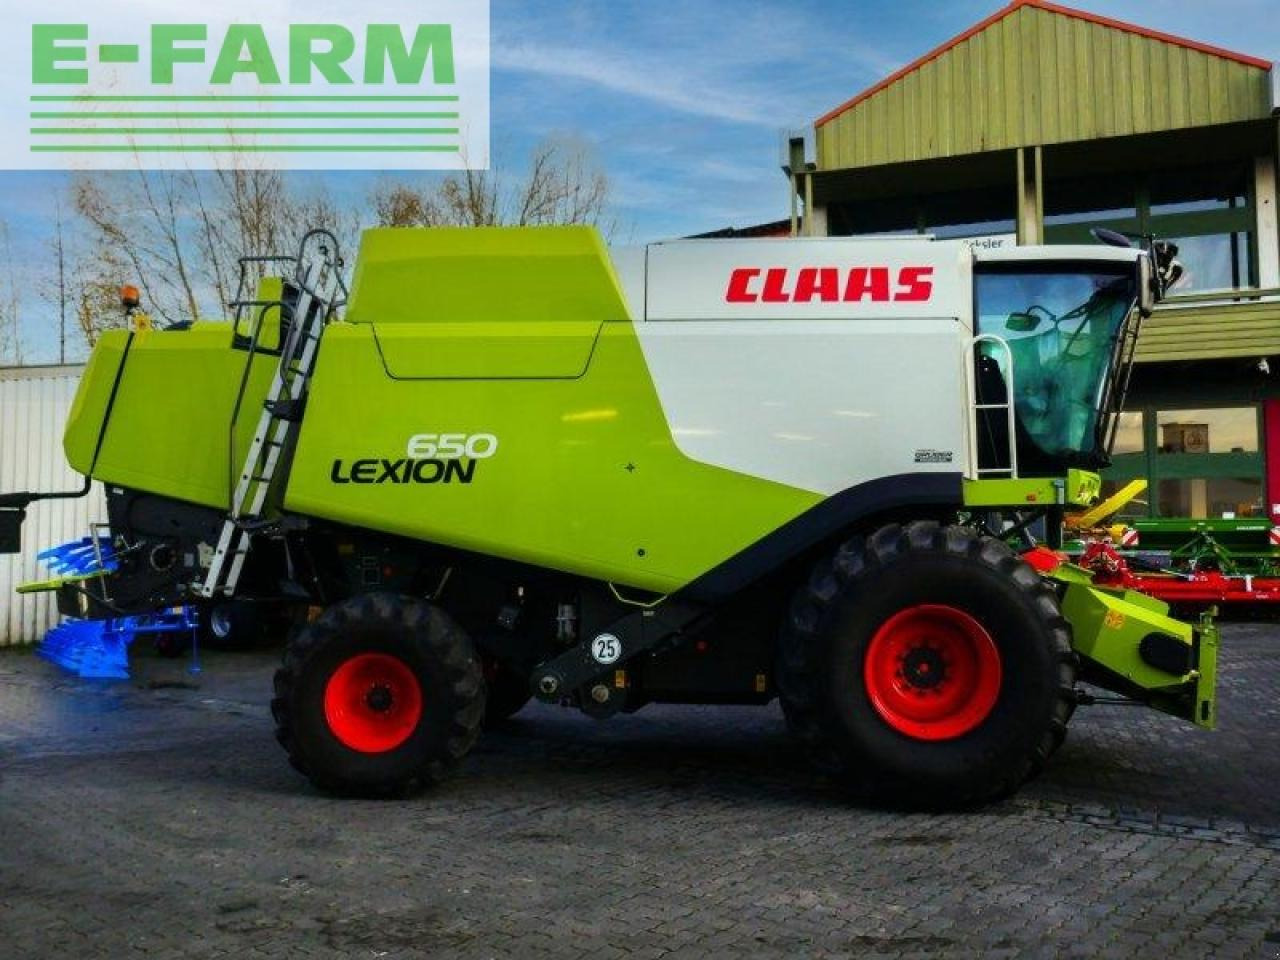 Combine harvester CLAAS lexion 650: picture 6